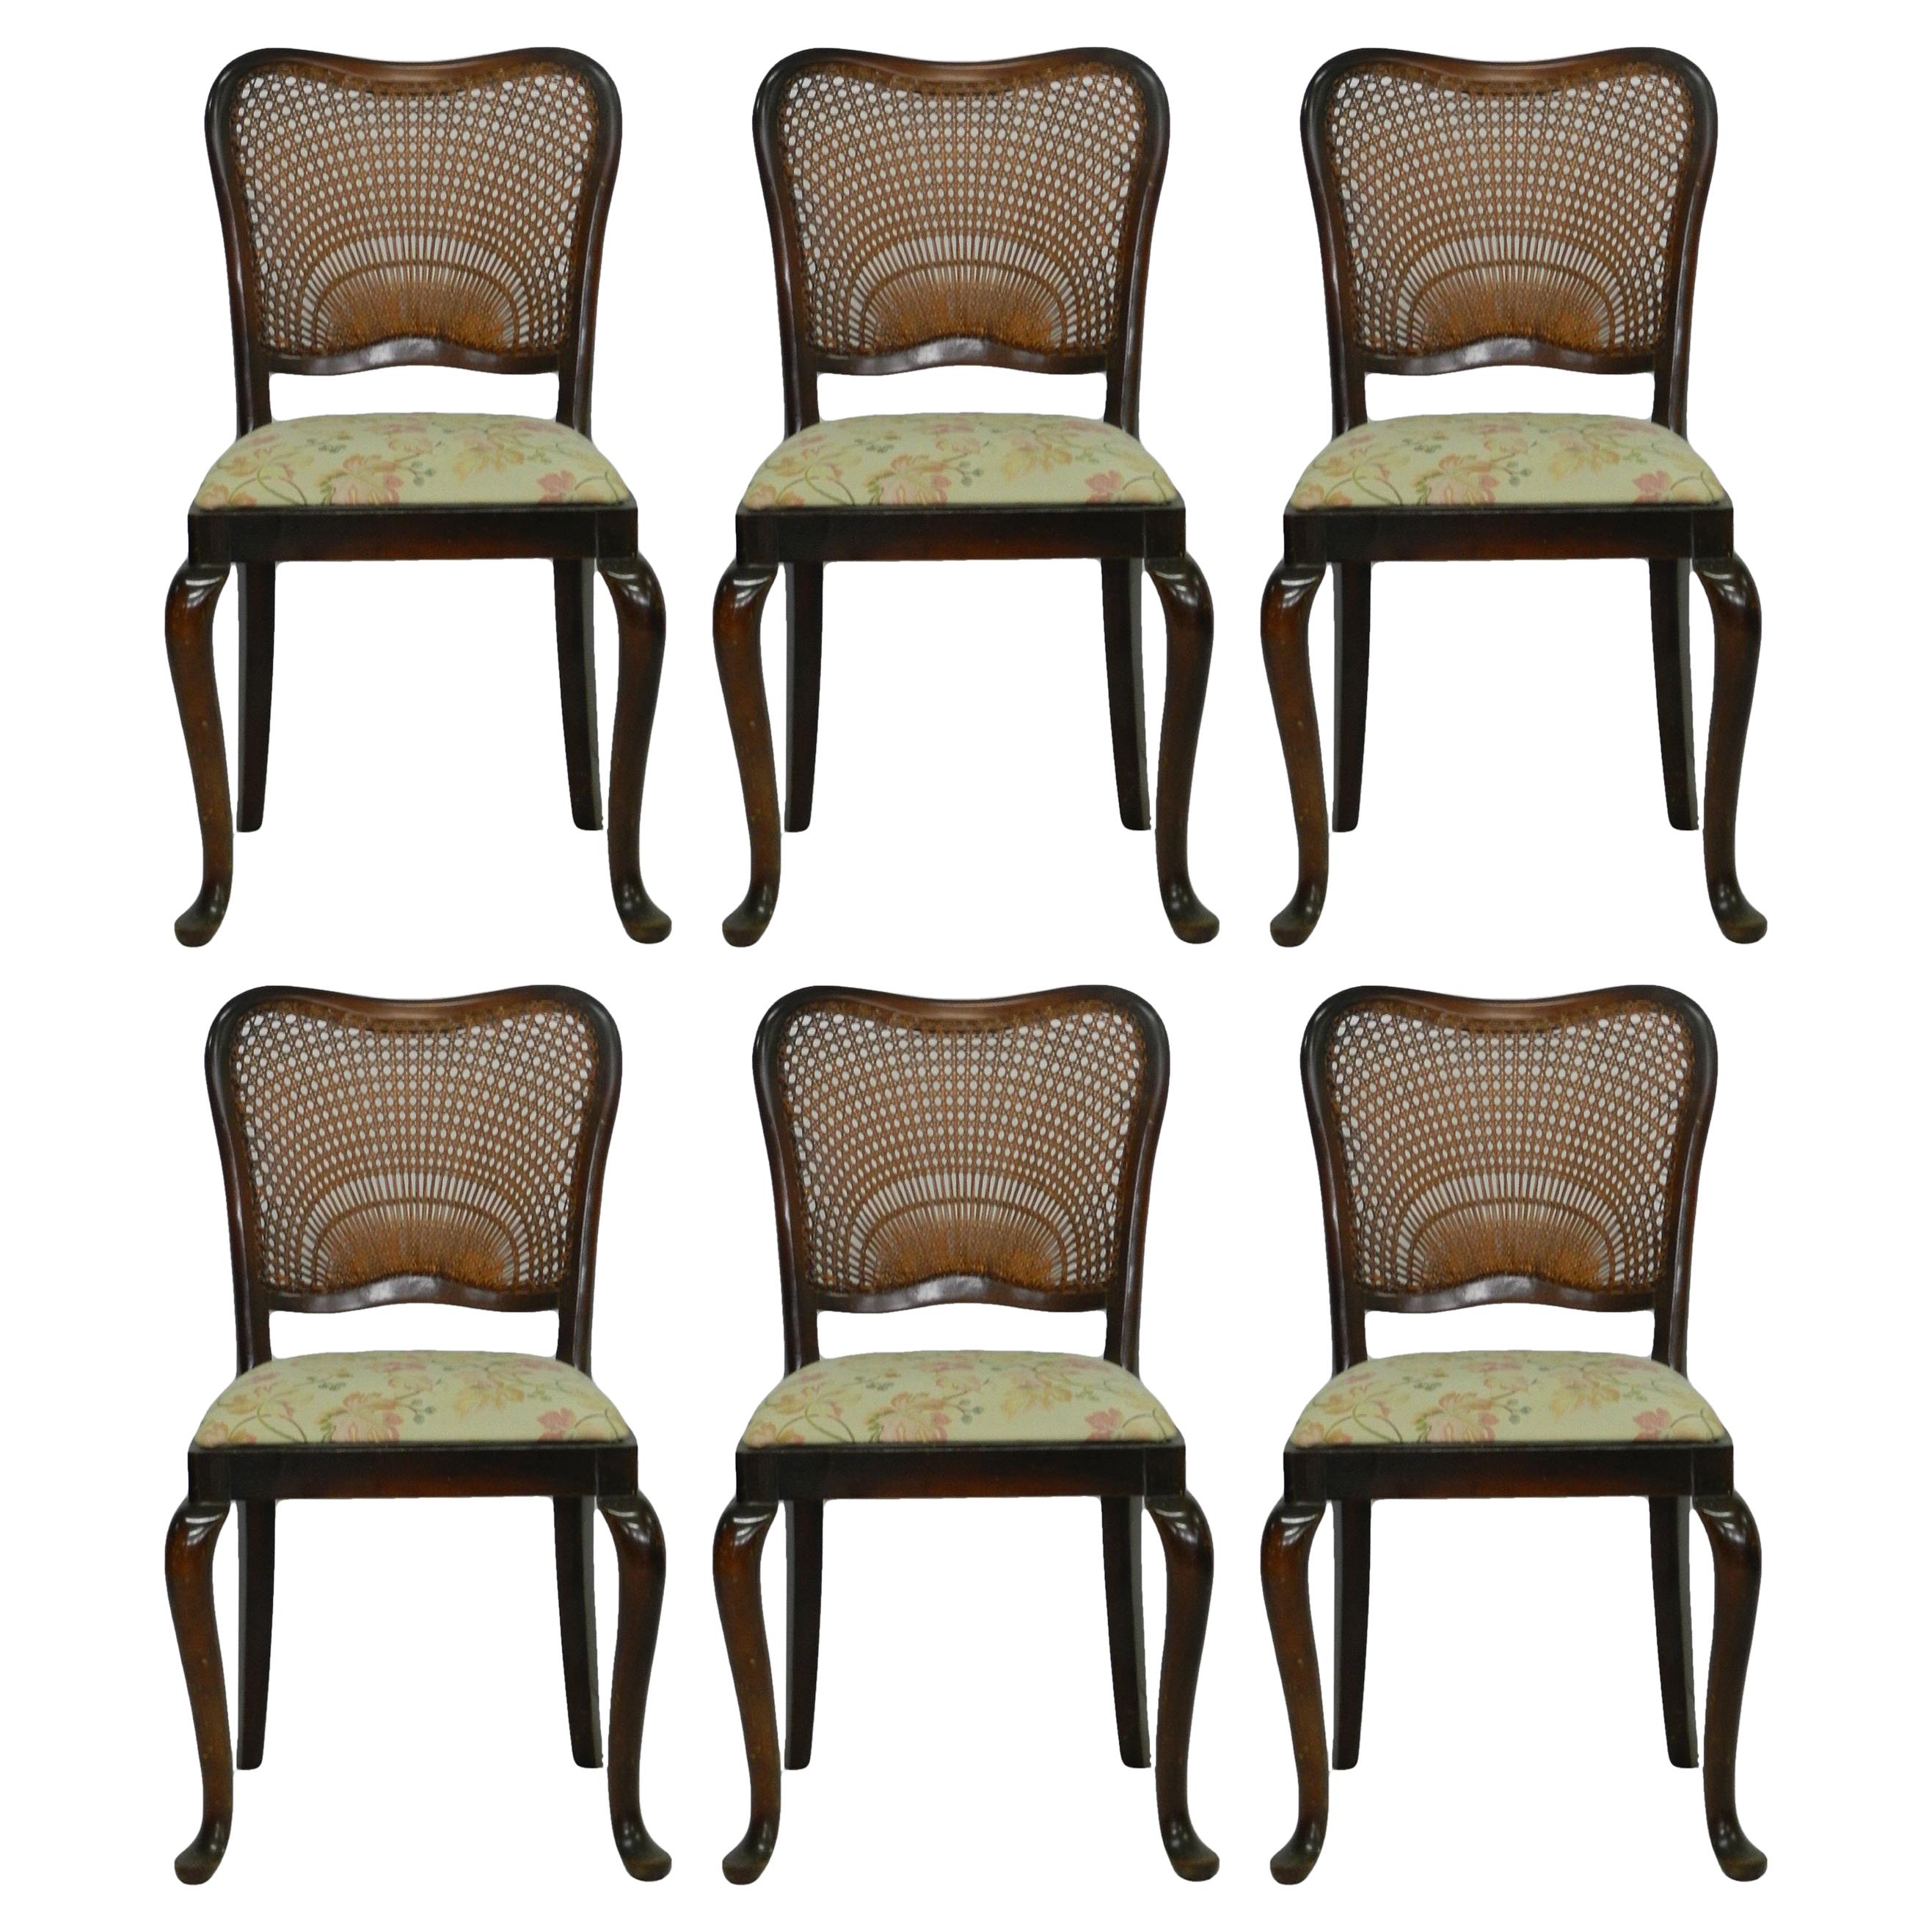 Six Dining Chairs French Cane Back Upholstered, 20th Century